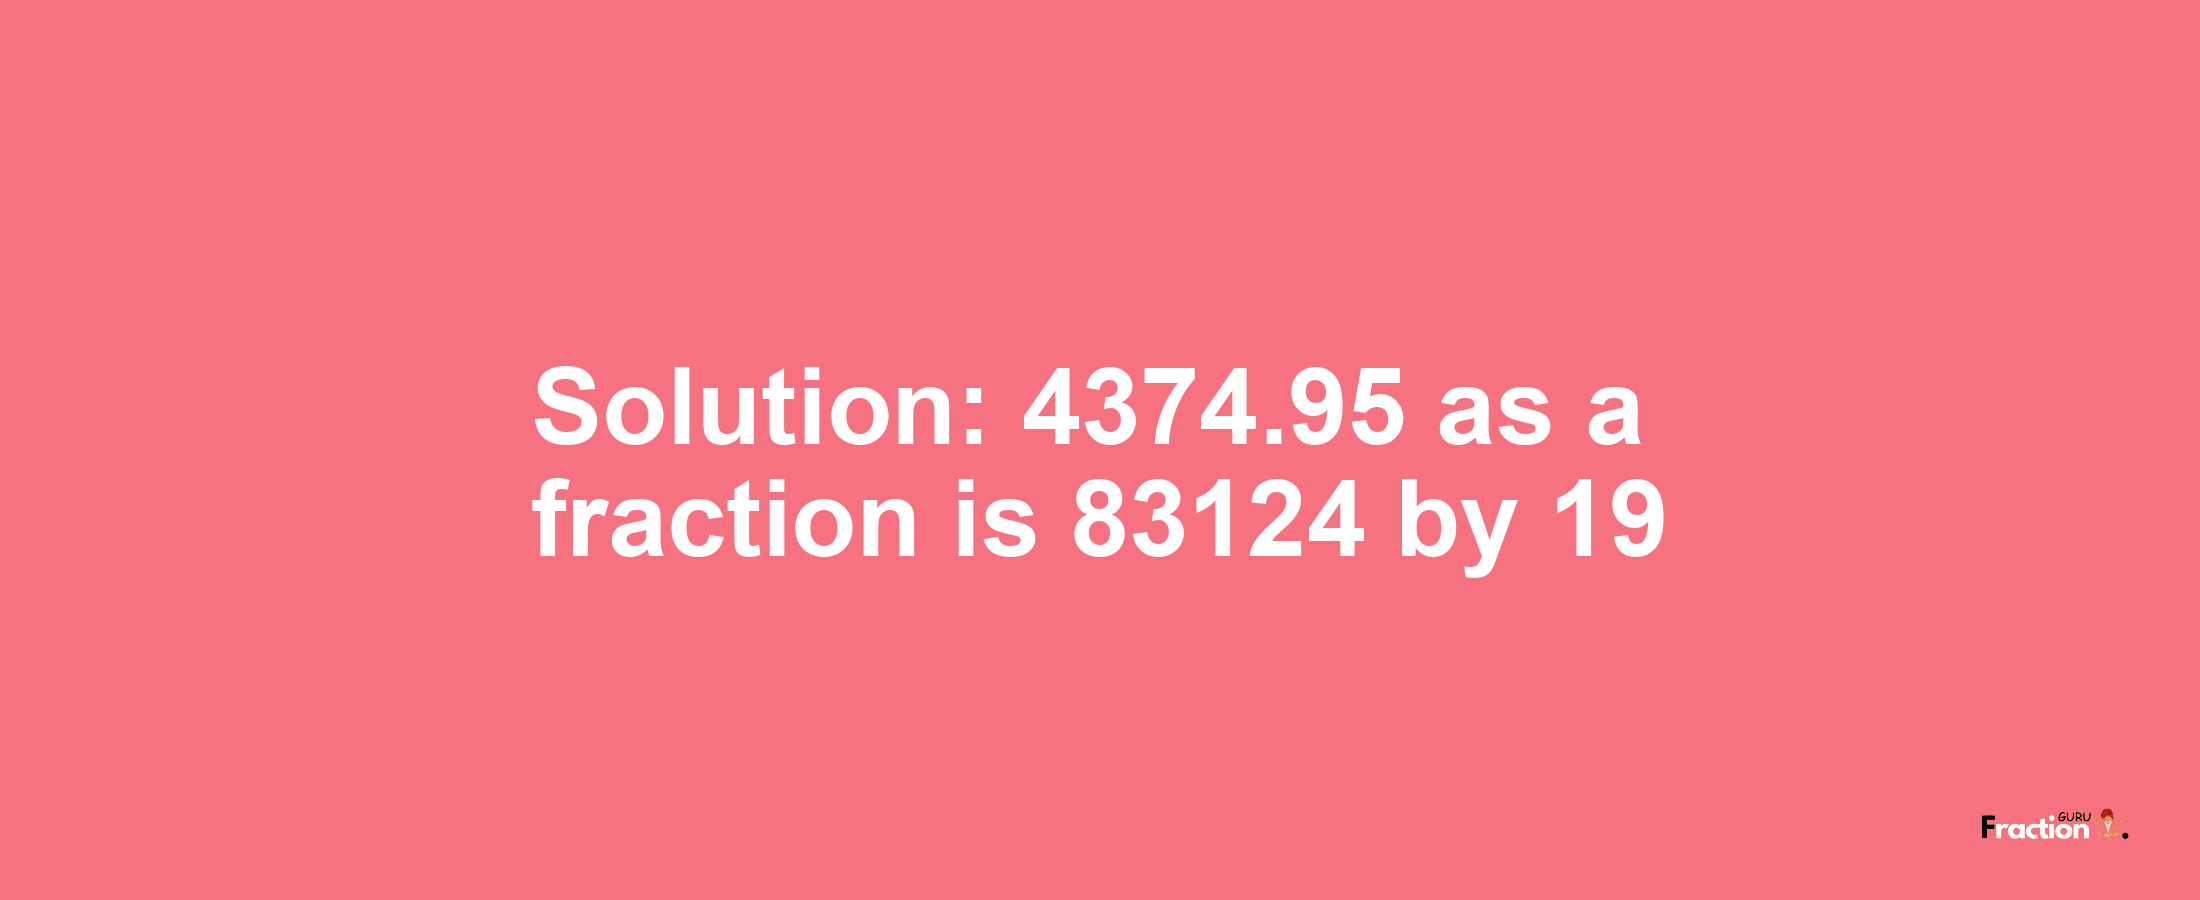 Solution:4374.95 as a fraction is 83124/19